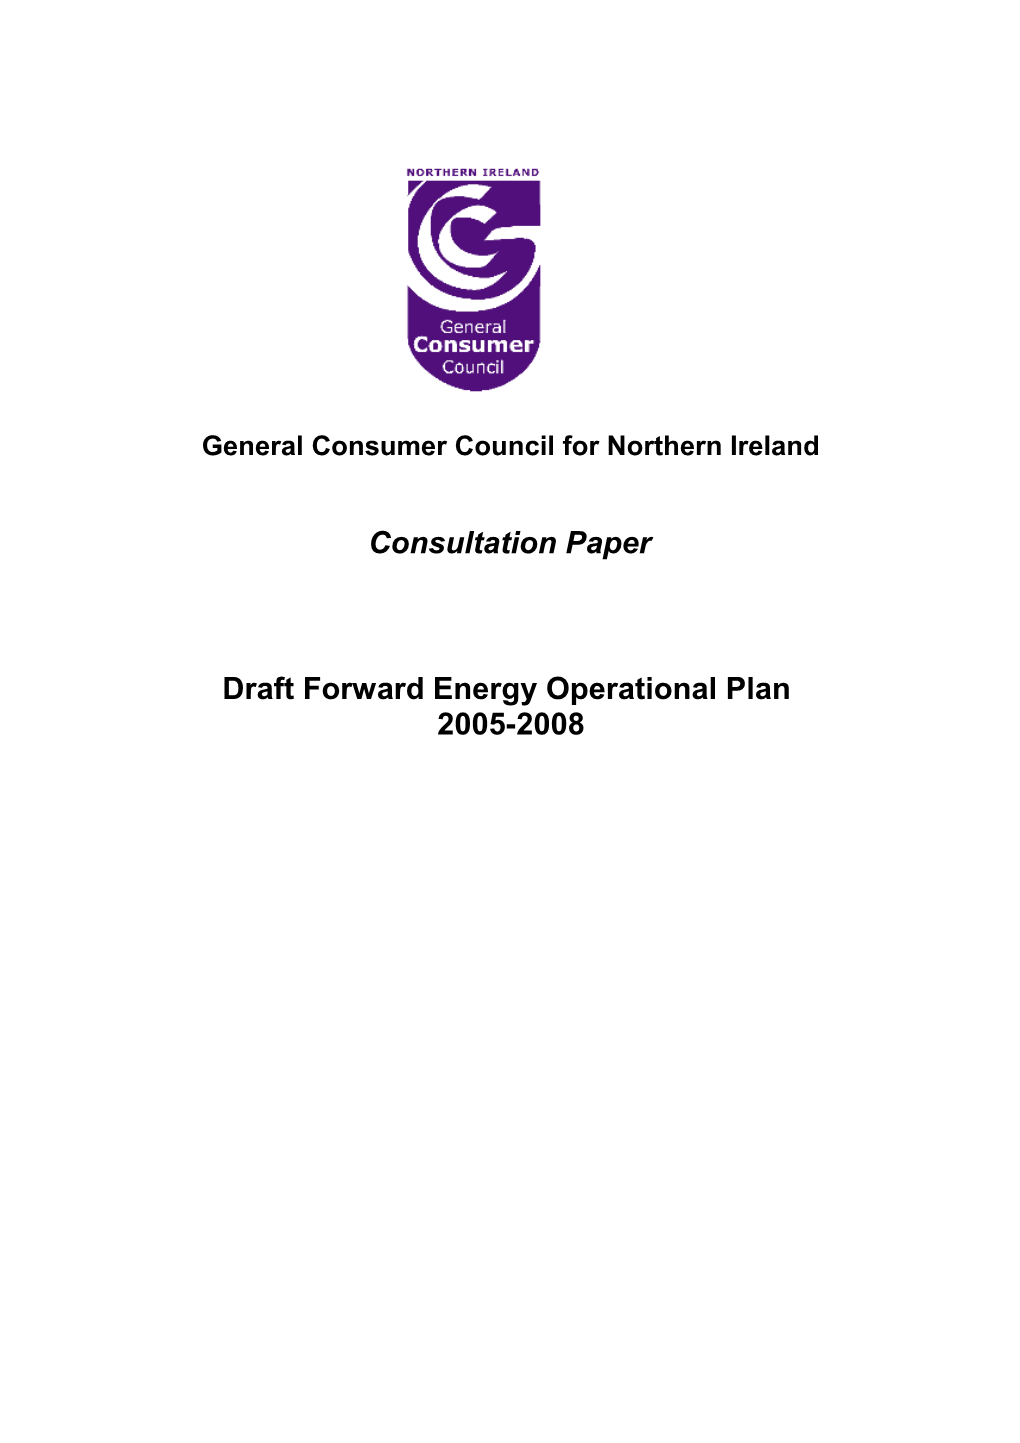 General Consumer Council for Northern Ireland